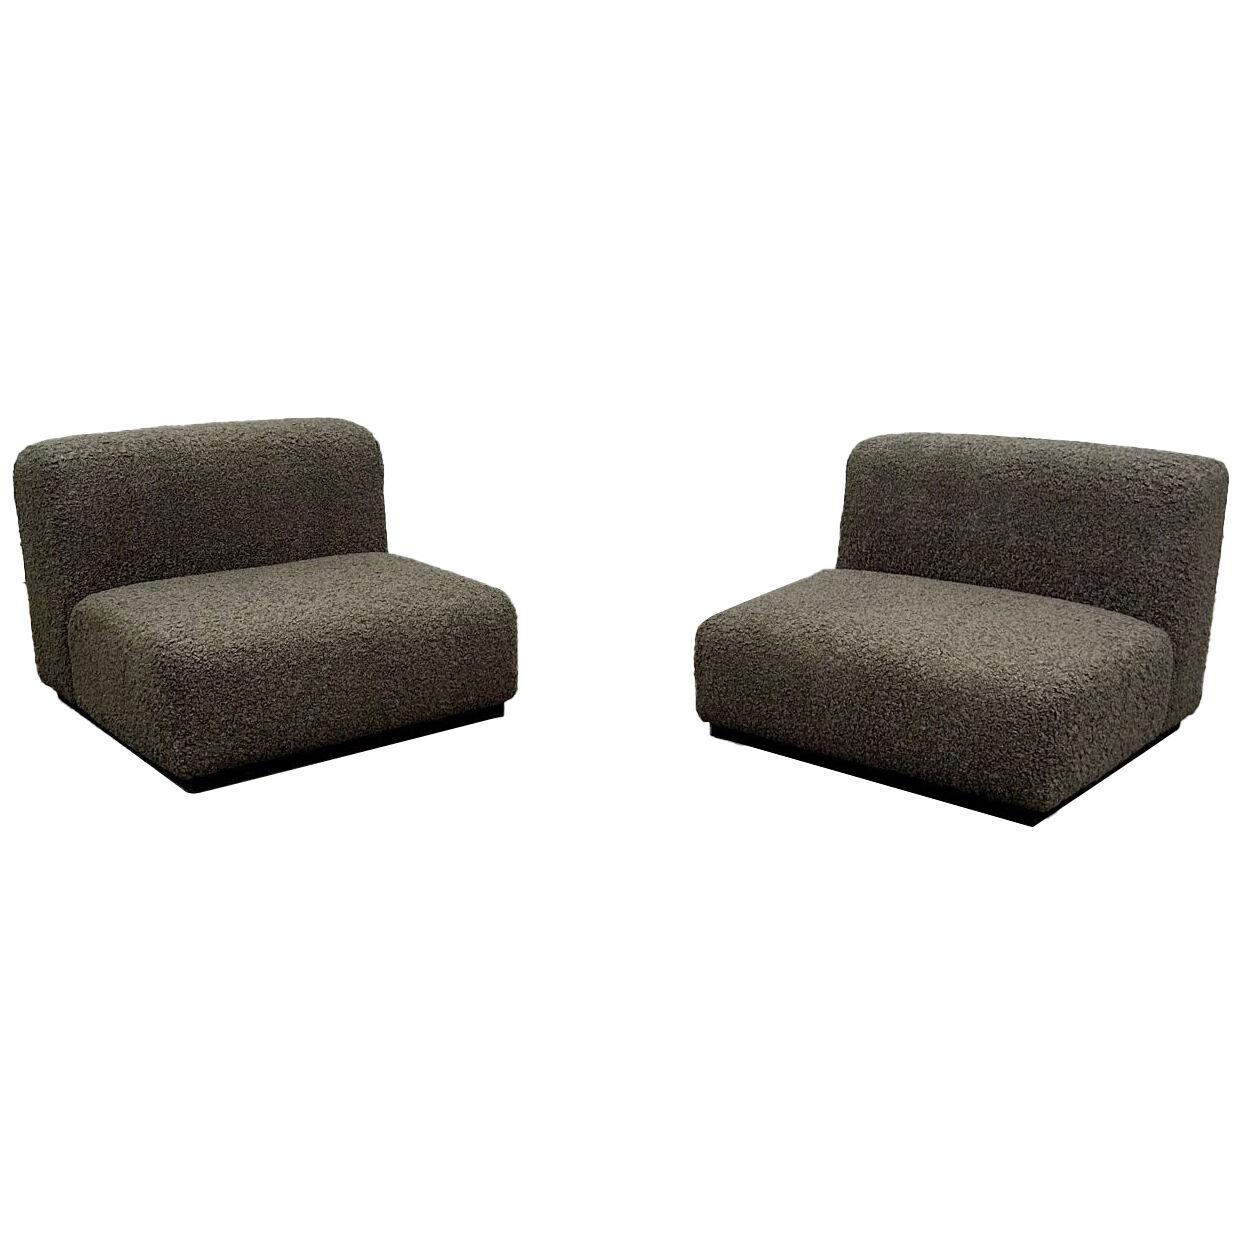 Pair of Mid-Century Modern Stendig Lounge / Slipper Chairs, Gray Boucle